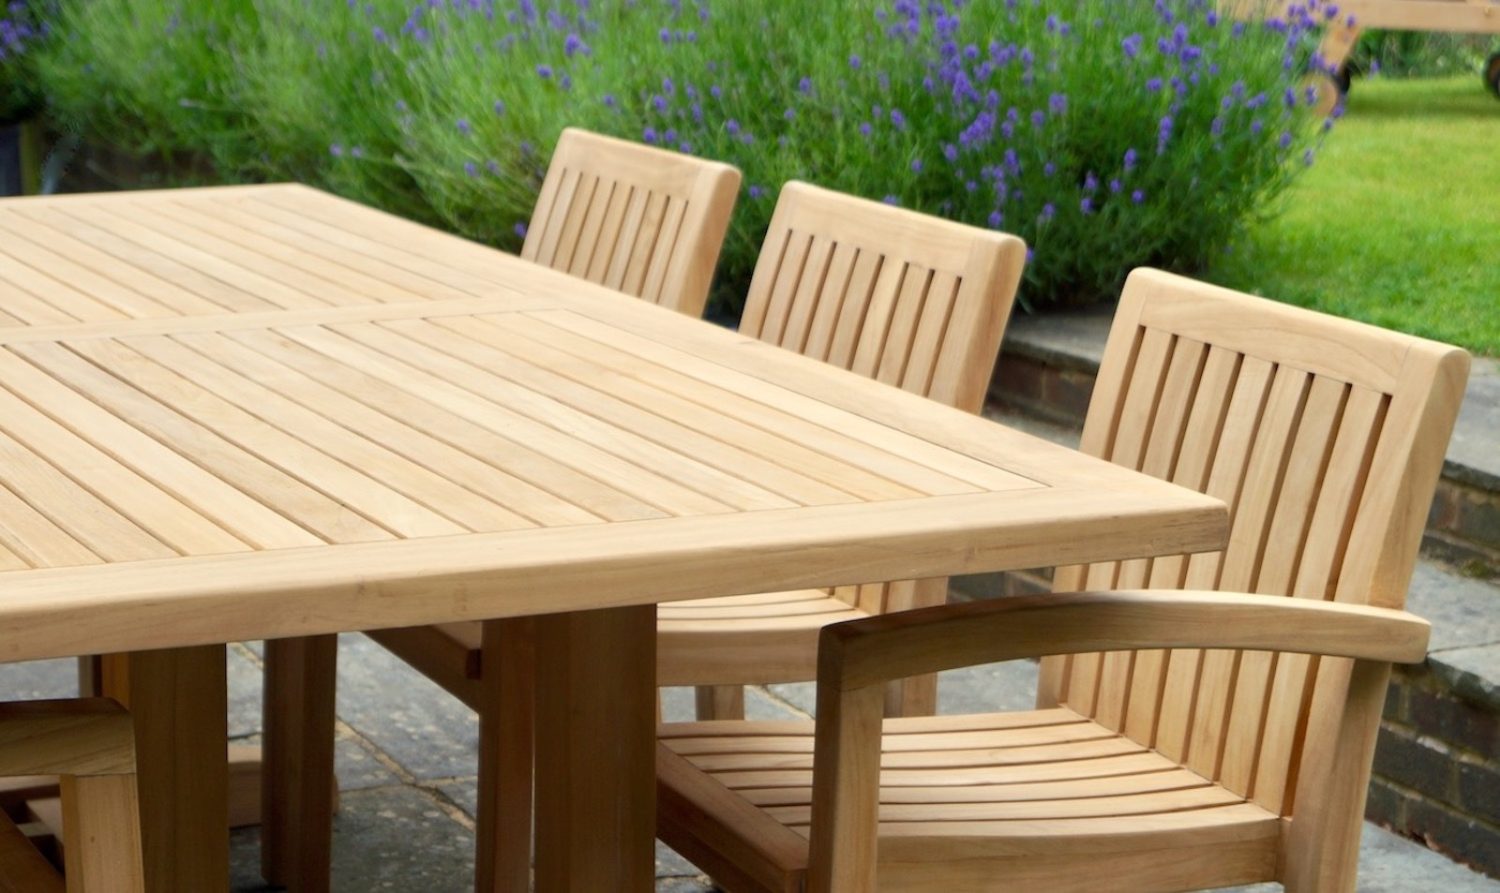 garden-wooden-table-and-chairs-makemesomethingspecial.com